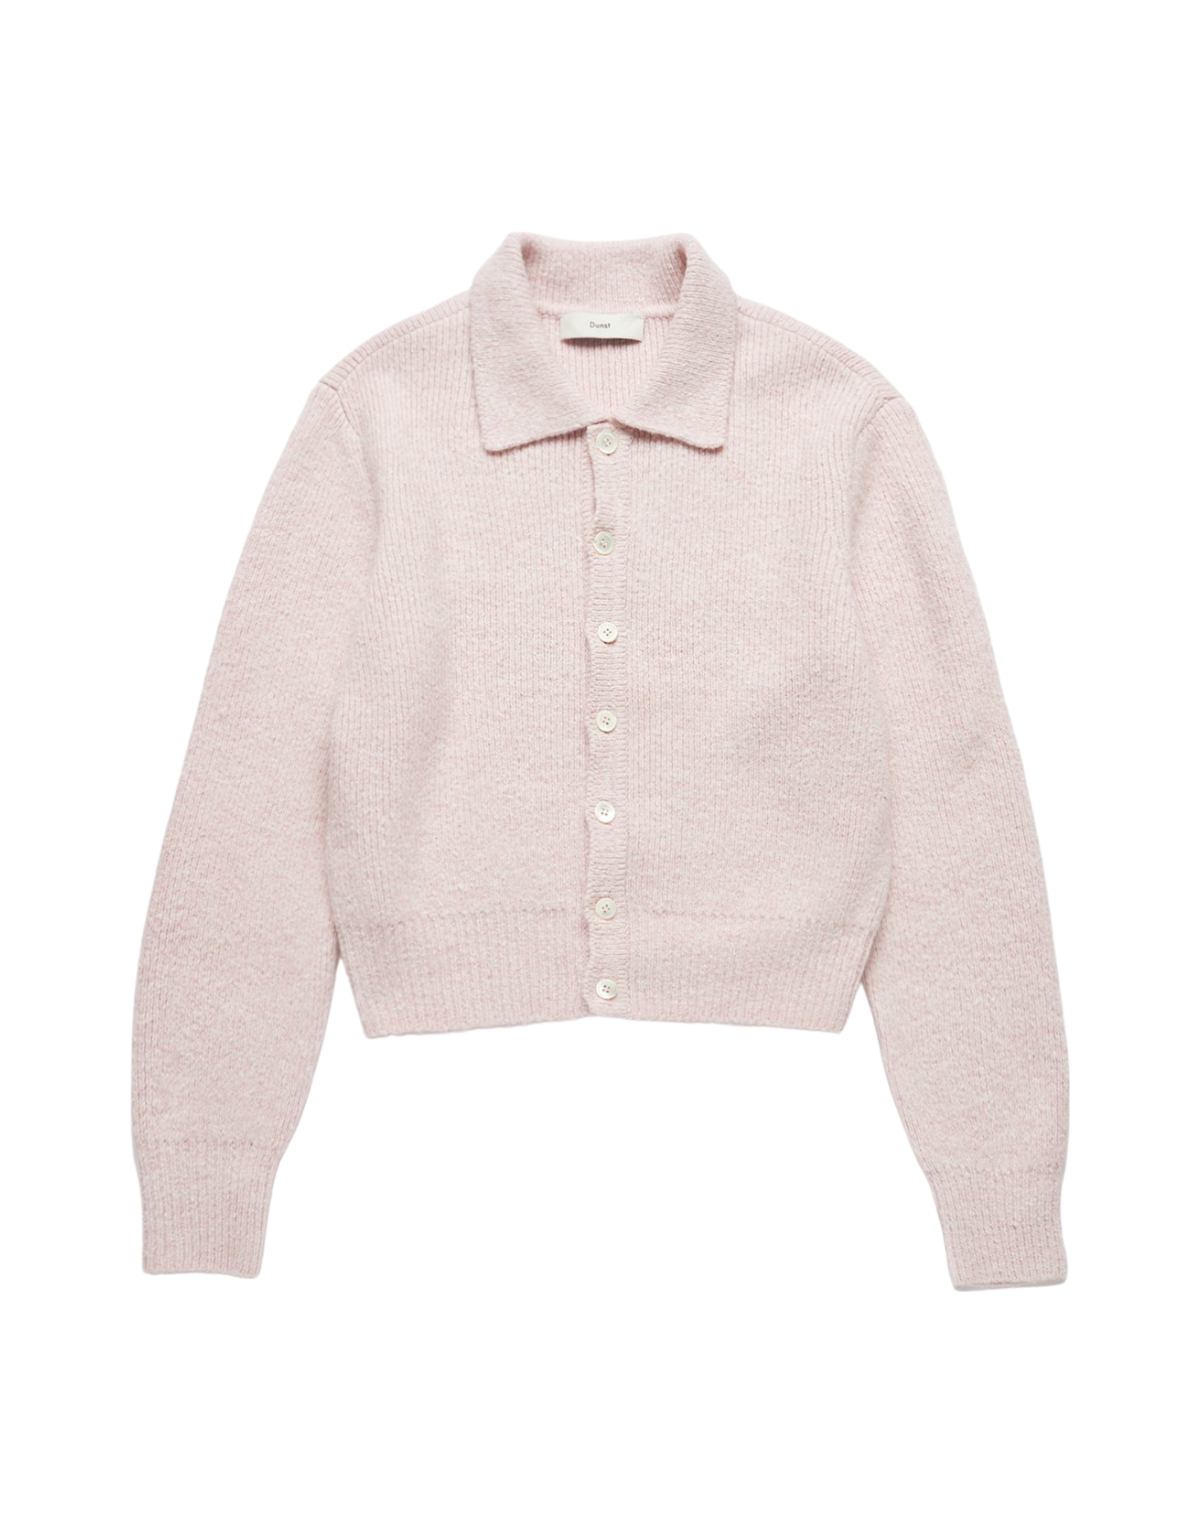 Unisex Open Collar Boucle Knit Cardigan In Soft Pink